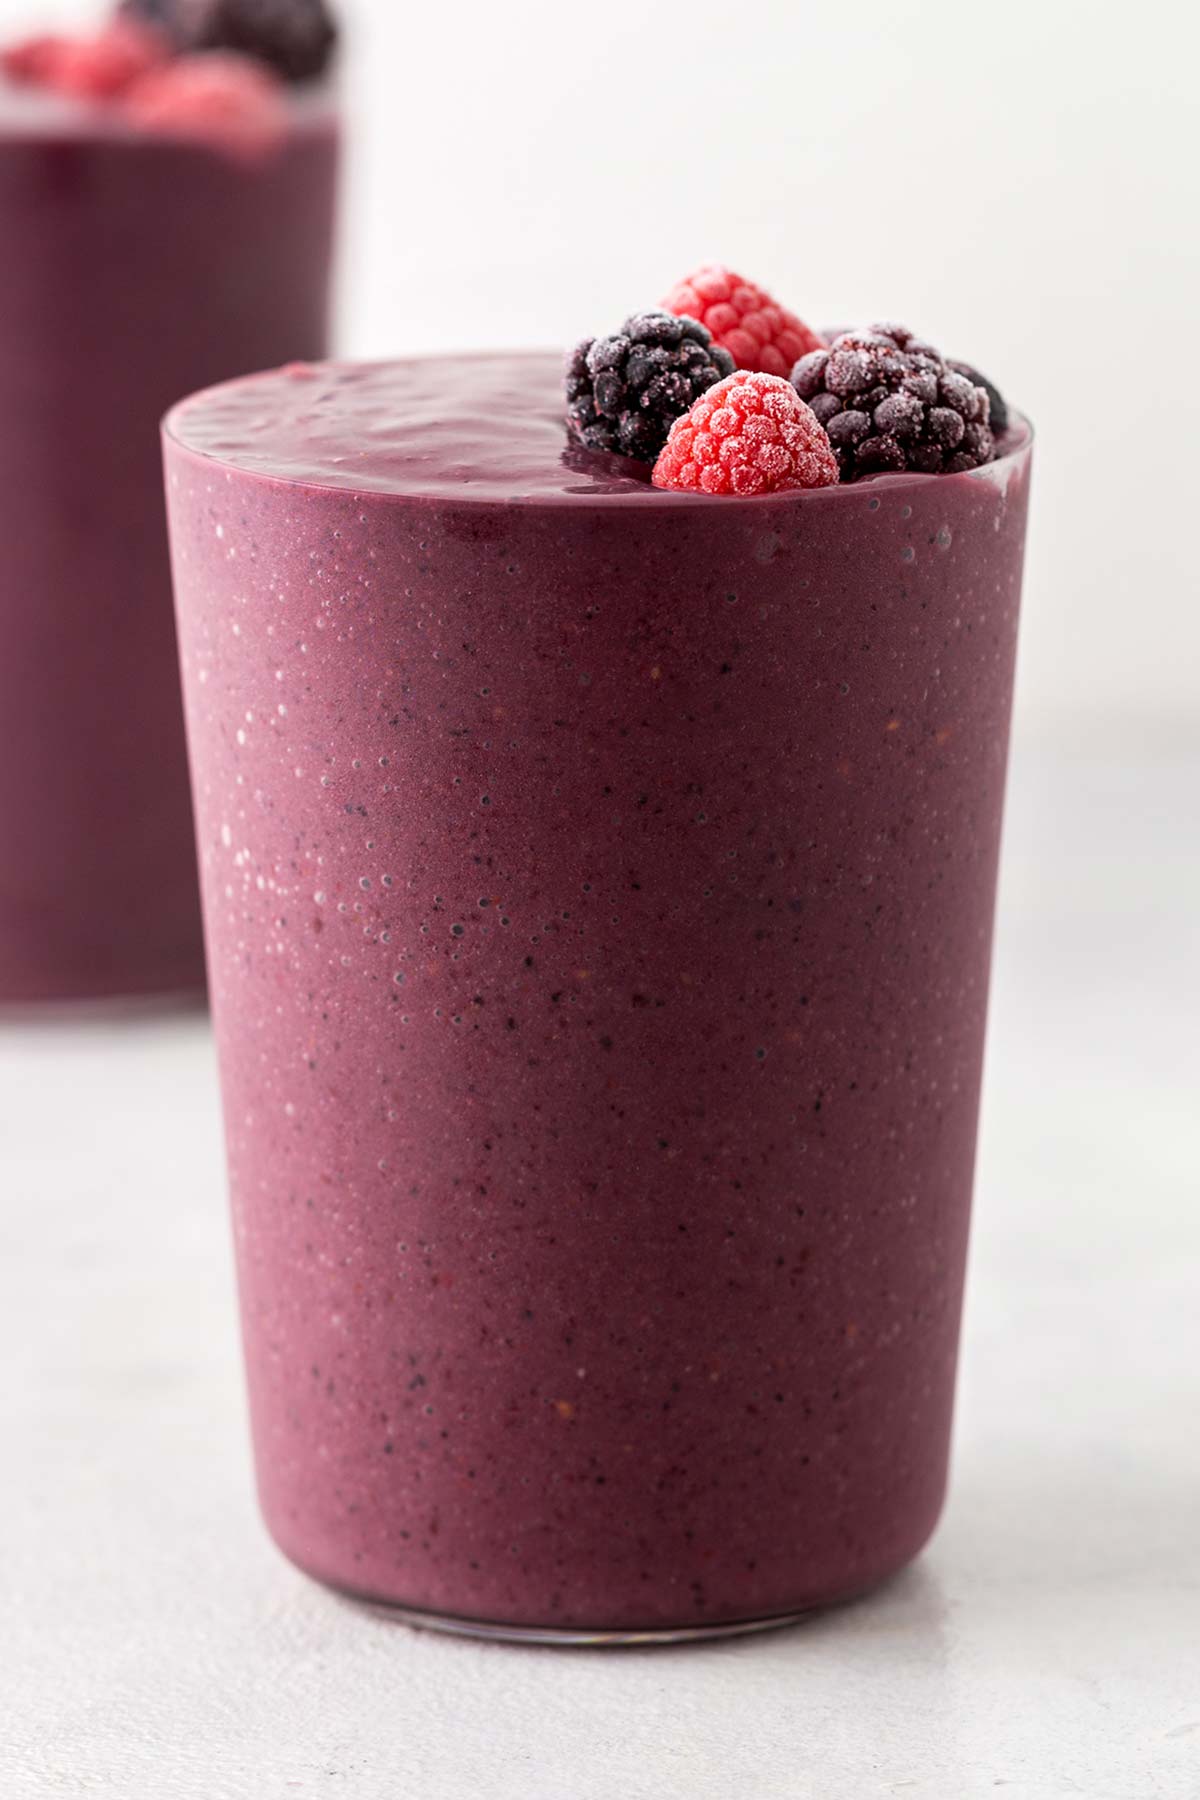 Acai smoothie in a glass.